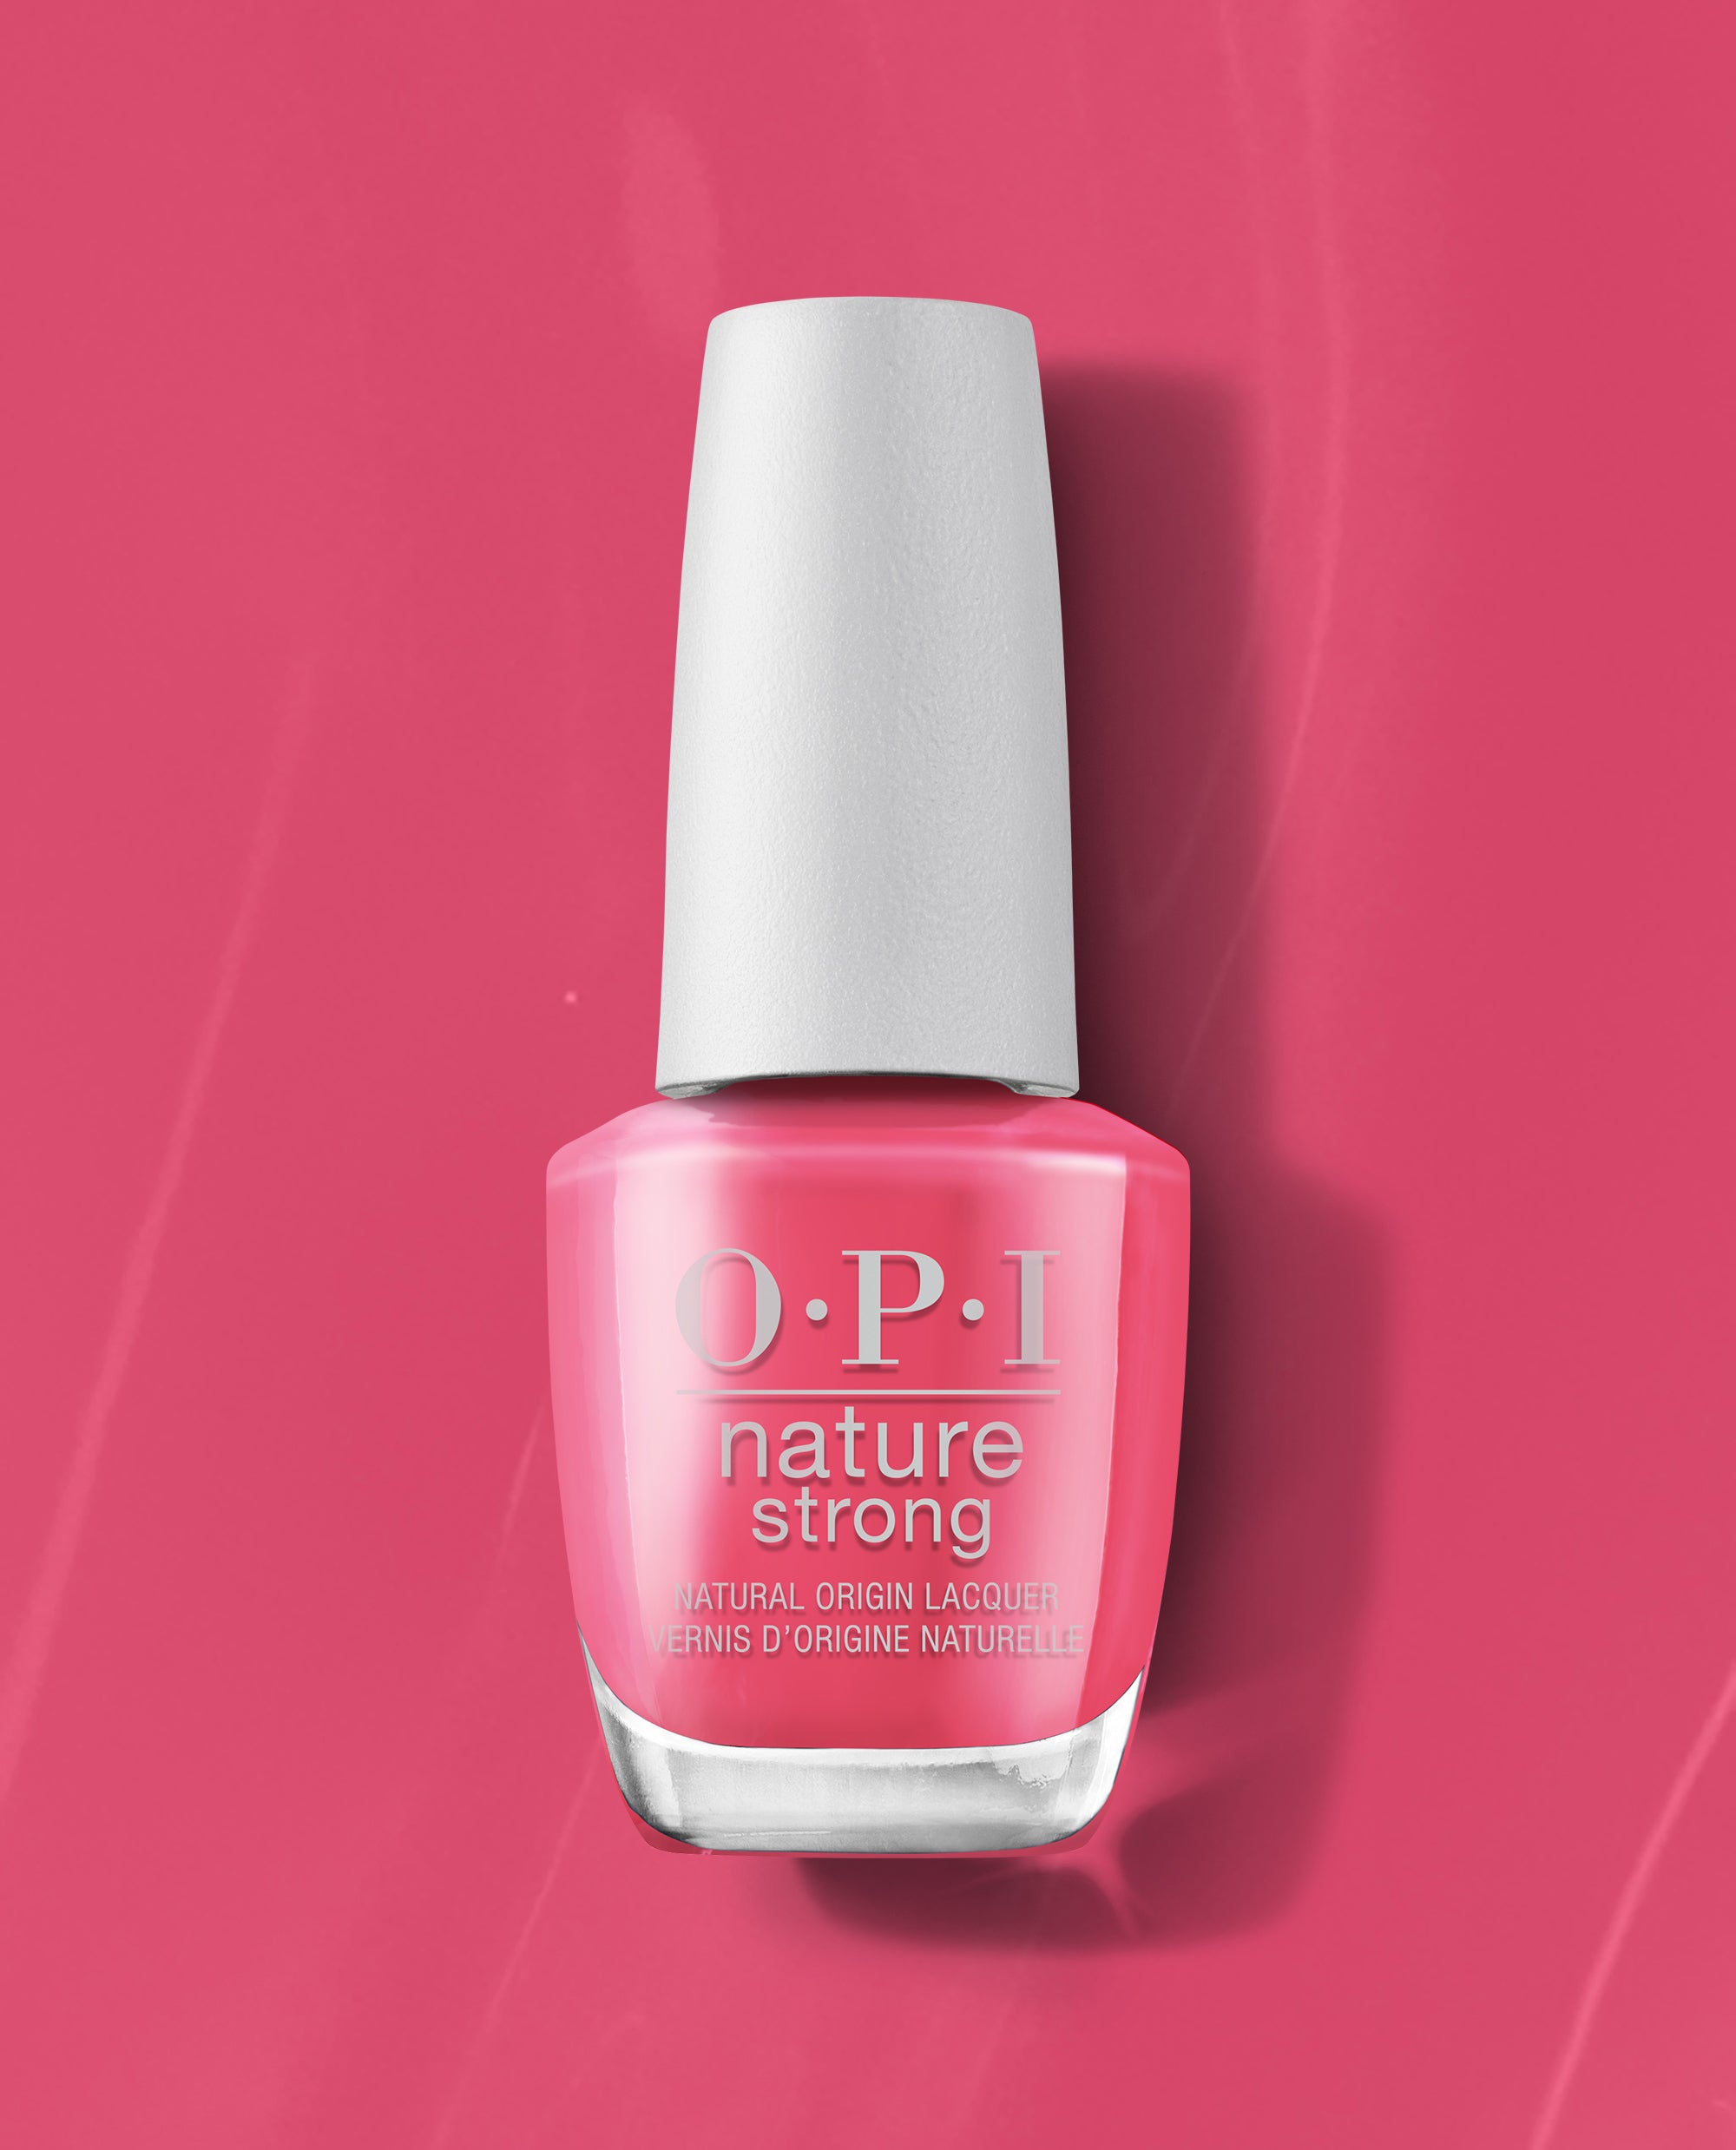 OPI Nail Lacquer - Power Of Hue Summer 2022 - The Future Is You NL B012 -  Walmart.com